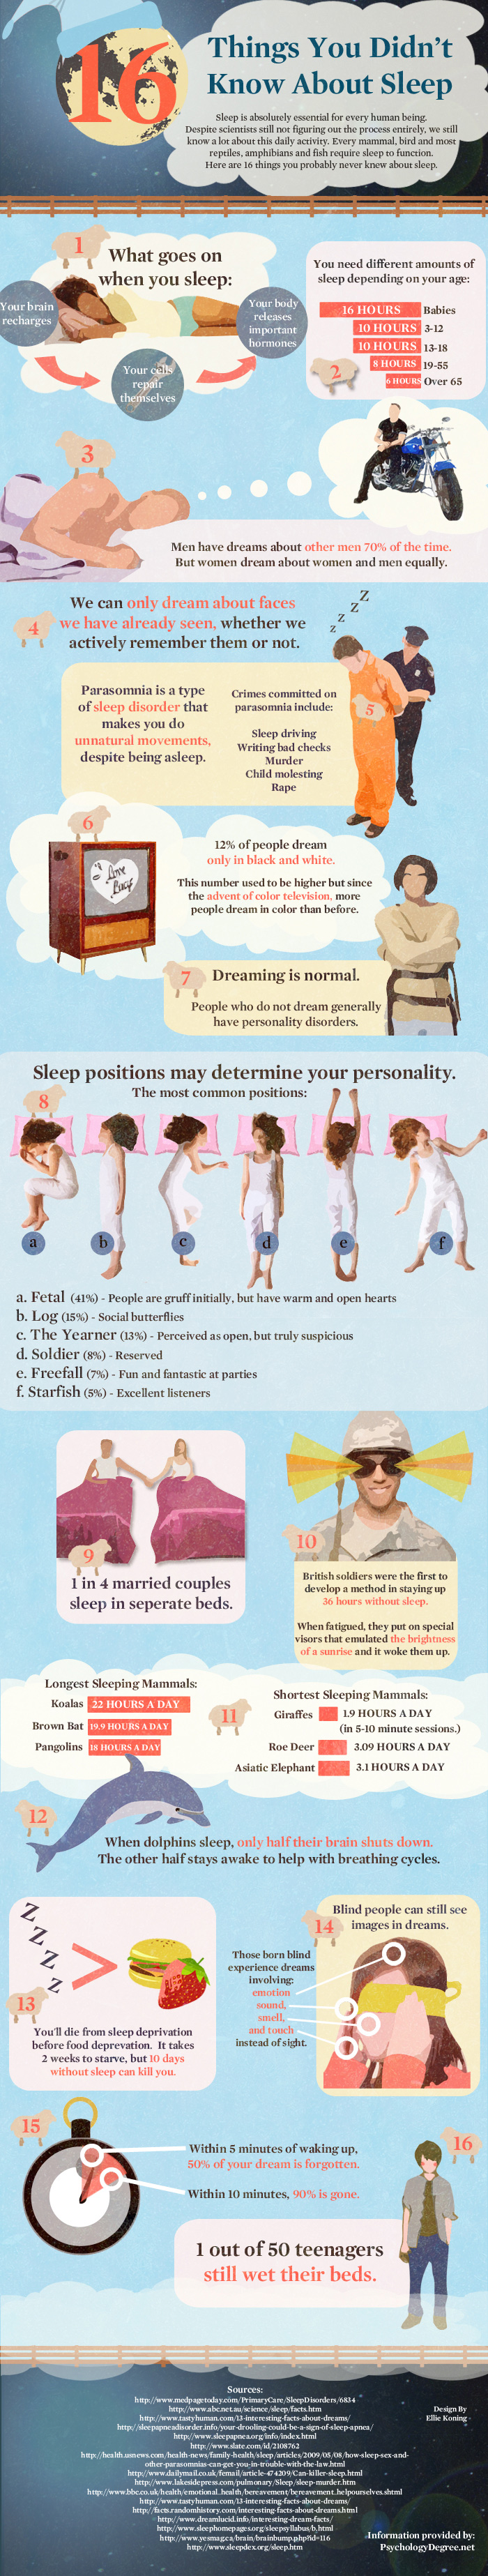 Infographic on 16 facts about sleep,